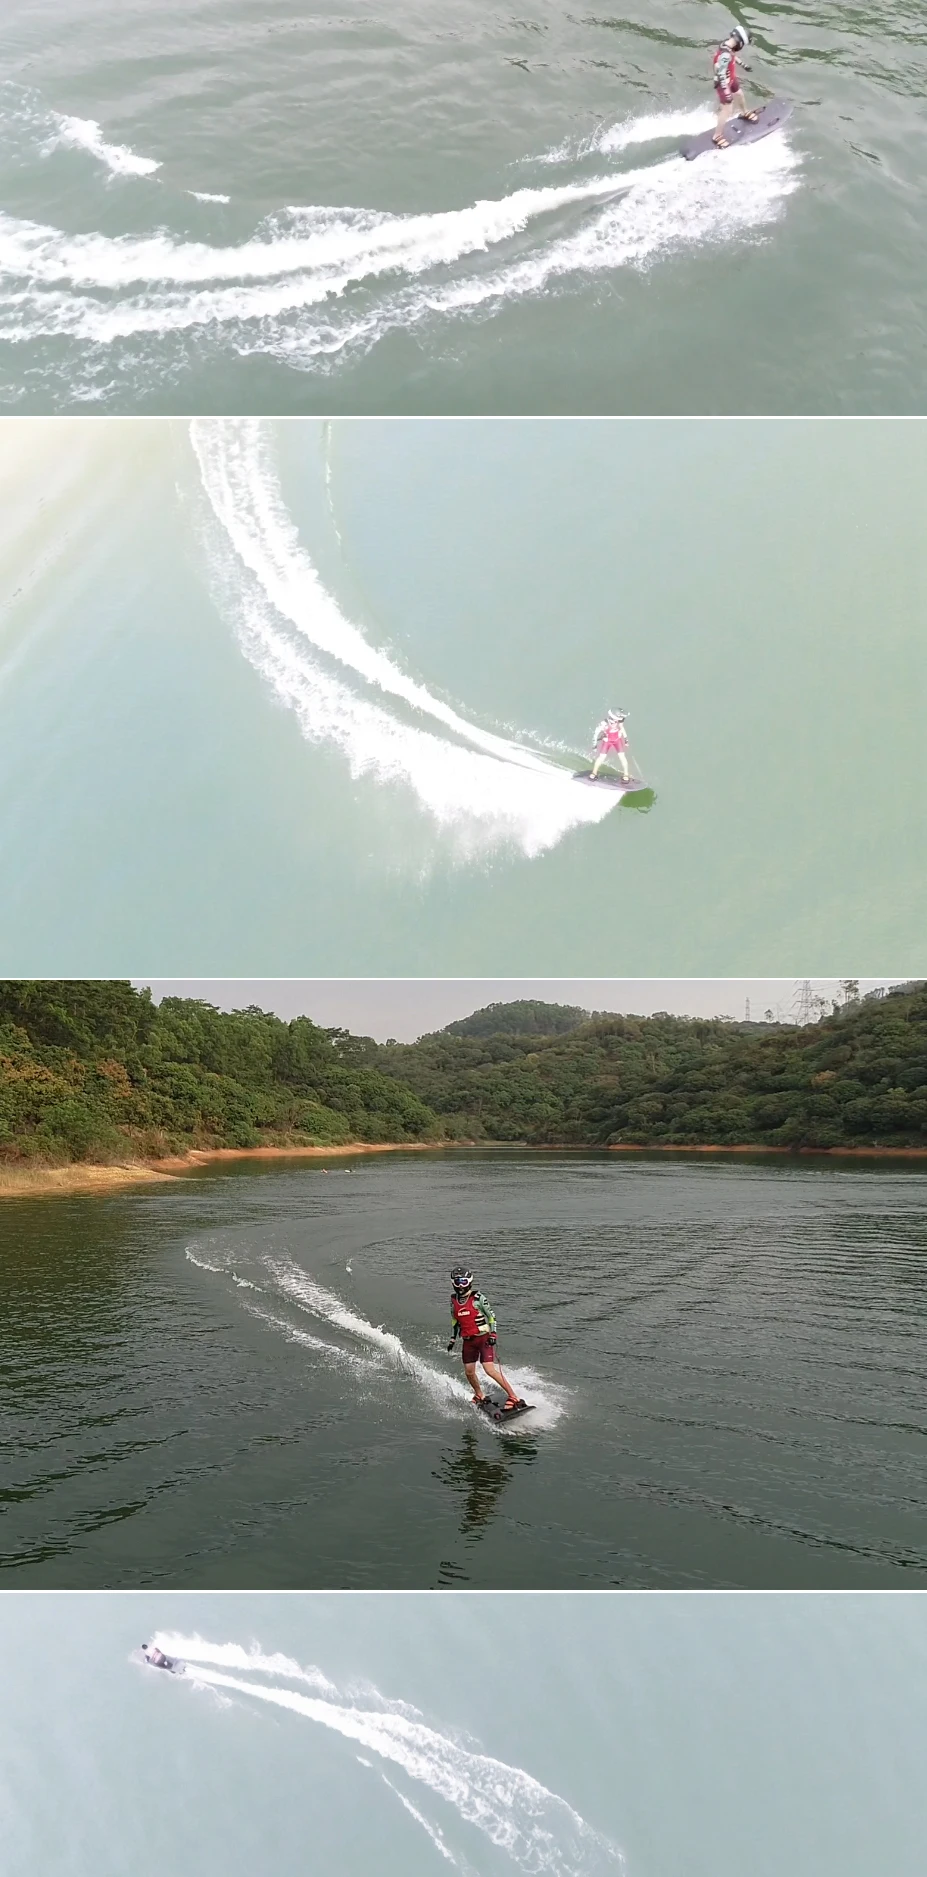 Jet Surf Water Sports 72V 51Ah 12000W Surfboard Electrico Water Electric Jet Powered Board For Surfing